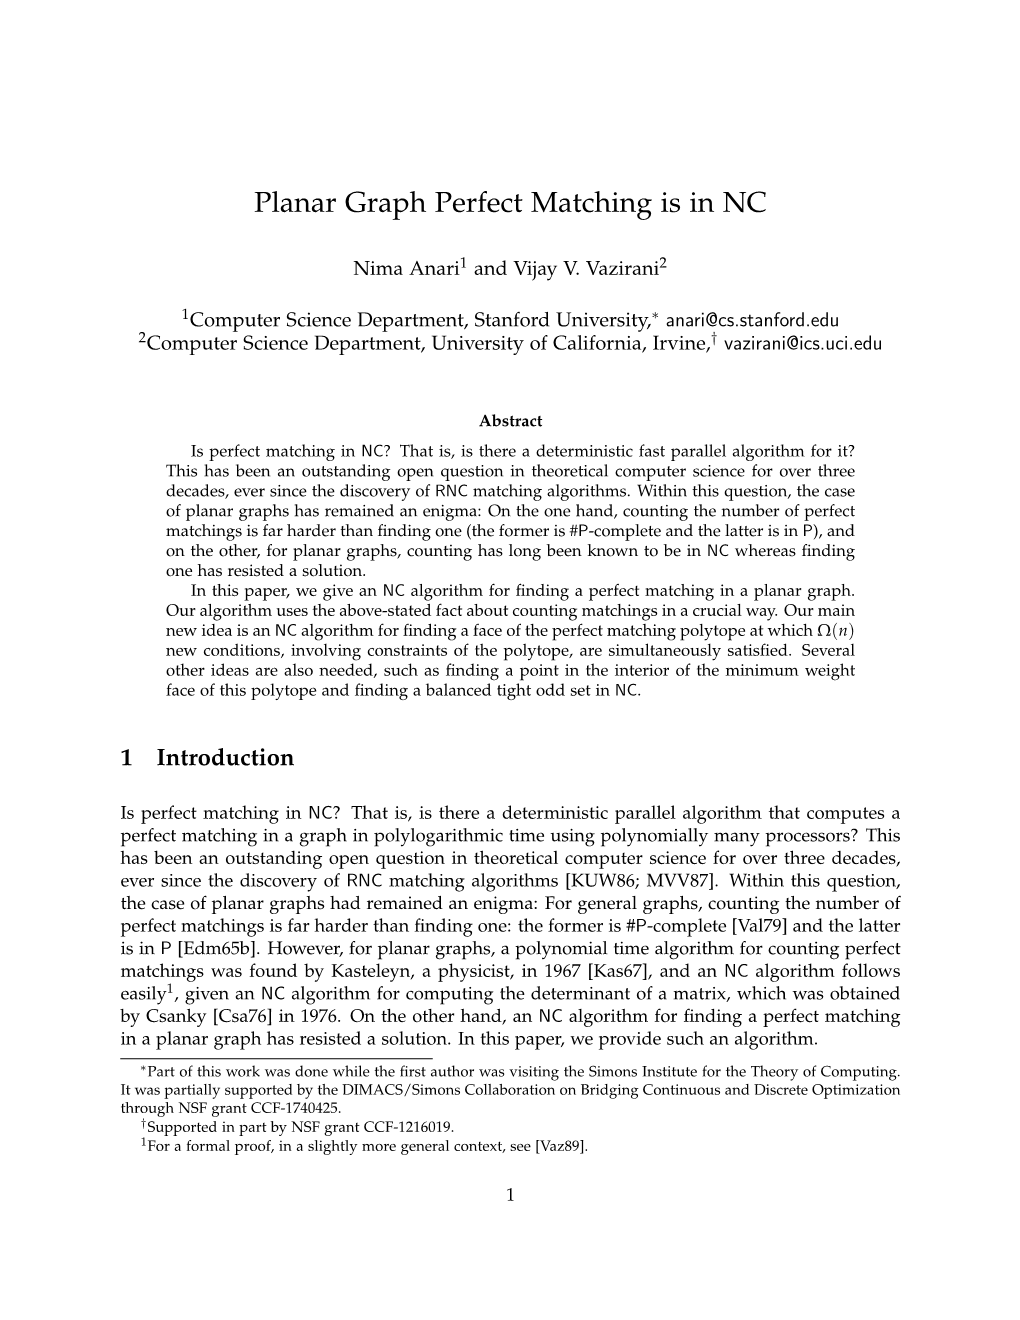 Planar Graph Perfect Matching Is in NC